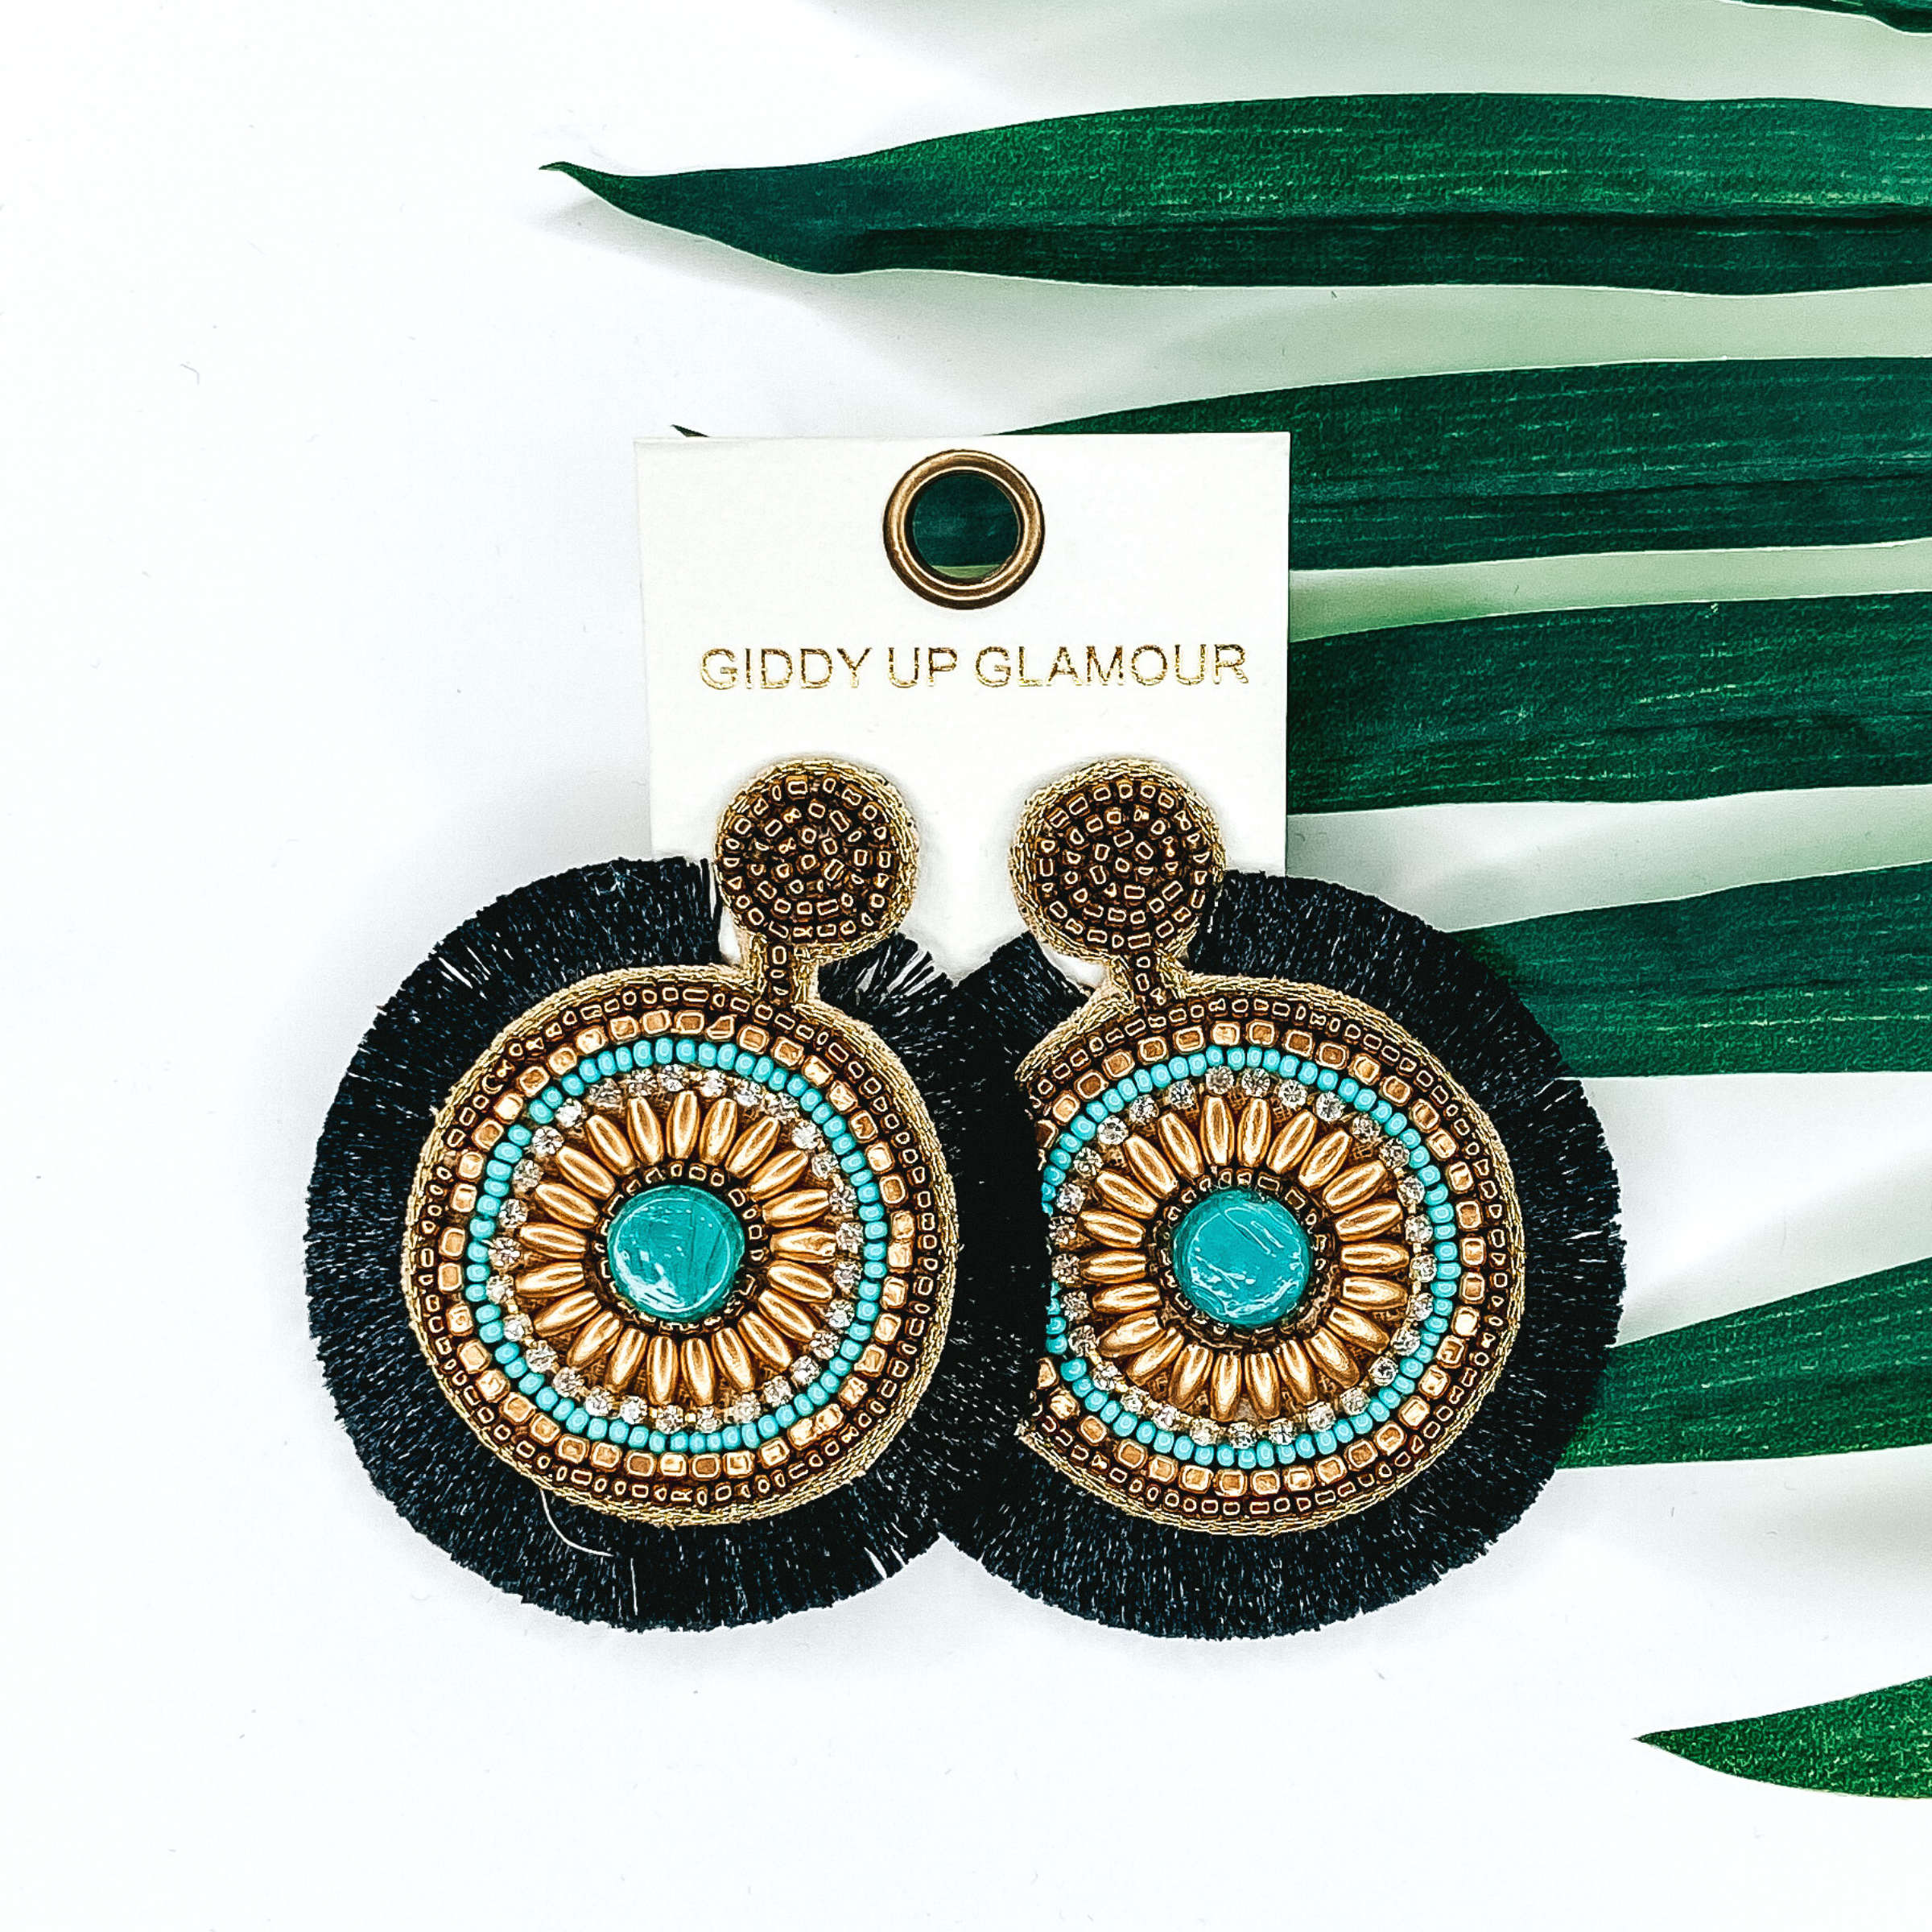 Circle beaded earrings with a black fringe out line. These earrings include gold and turquoise beads. These earrings are pictured on a white background with green leaves behind them. 